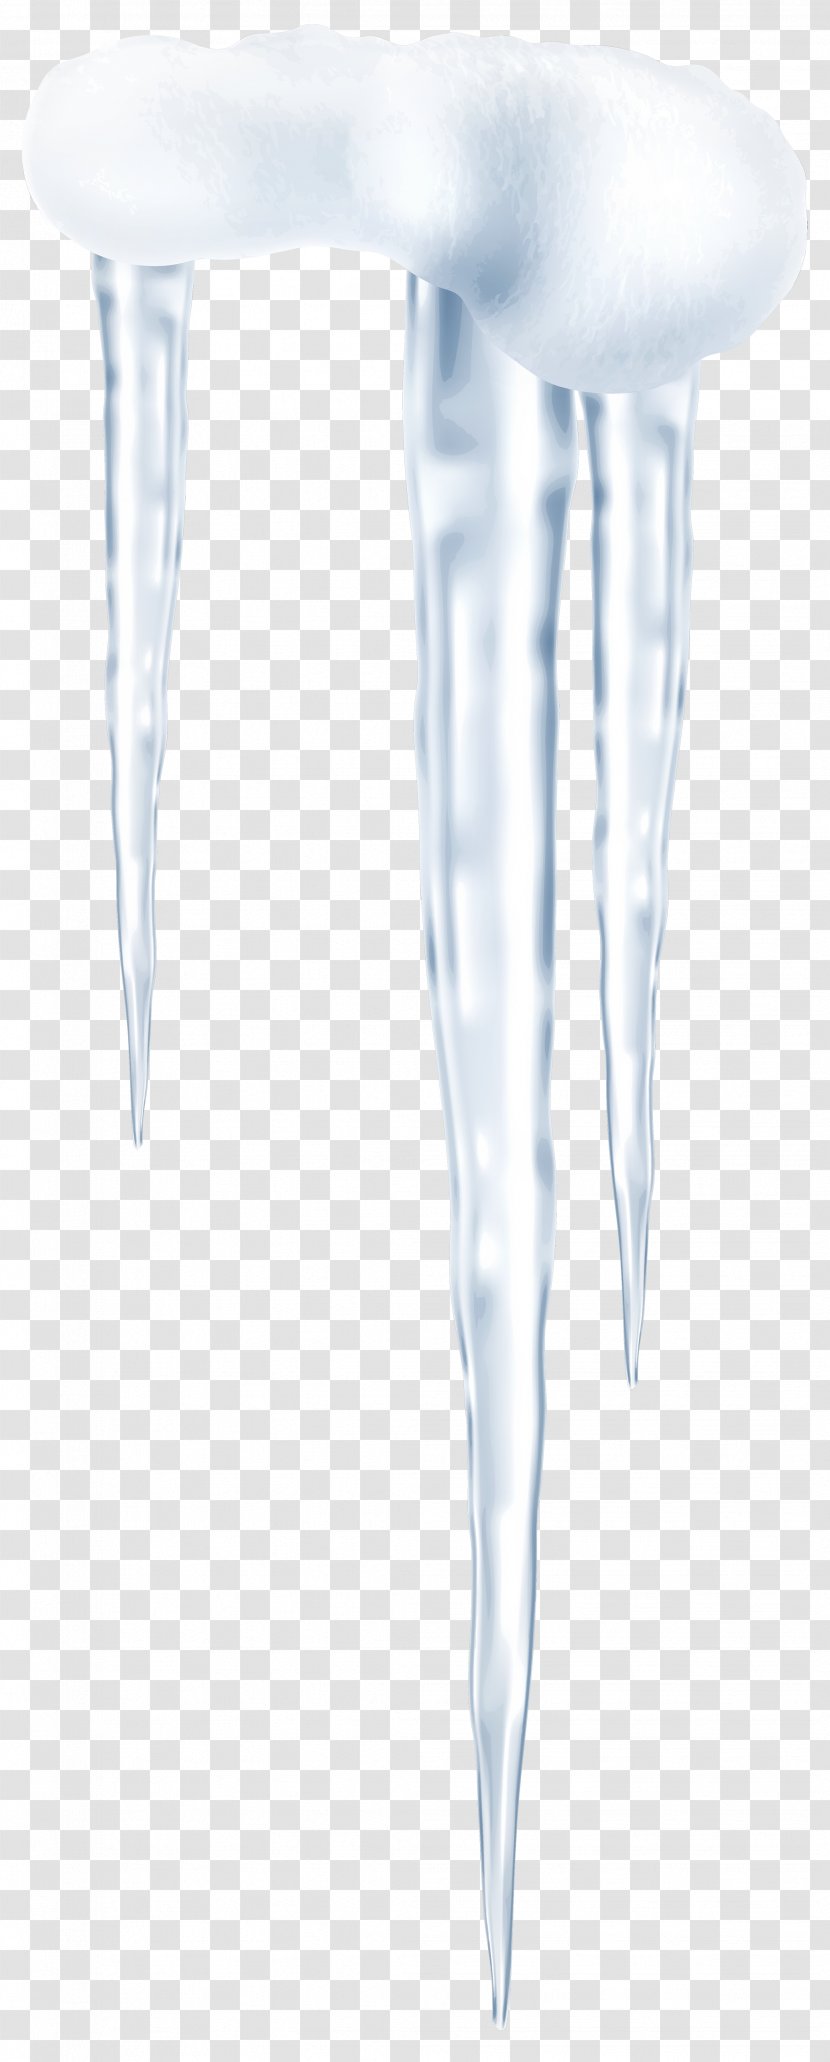 Table Furniture - Icicles Transparent PNG